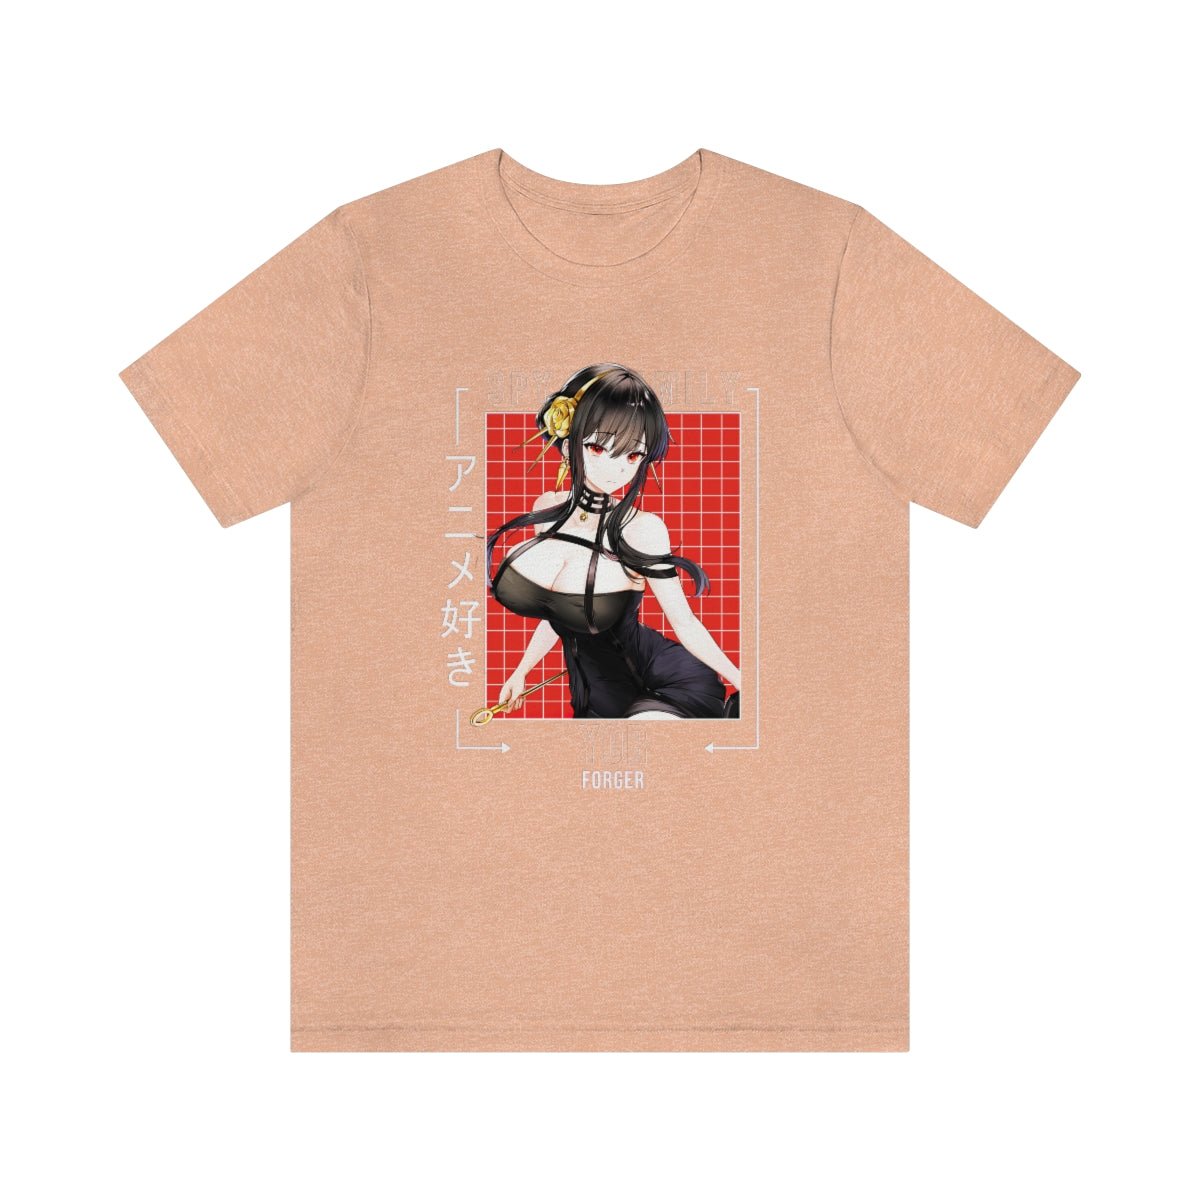 Yor Forger Spy x Family Anime Shirt - One Punch Fits